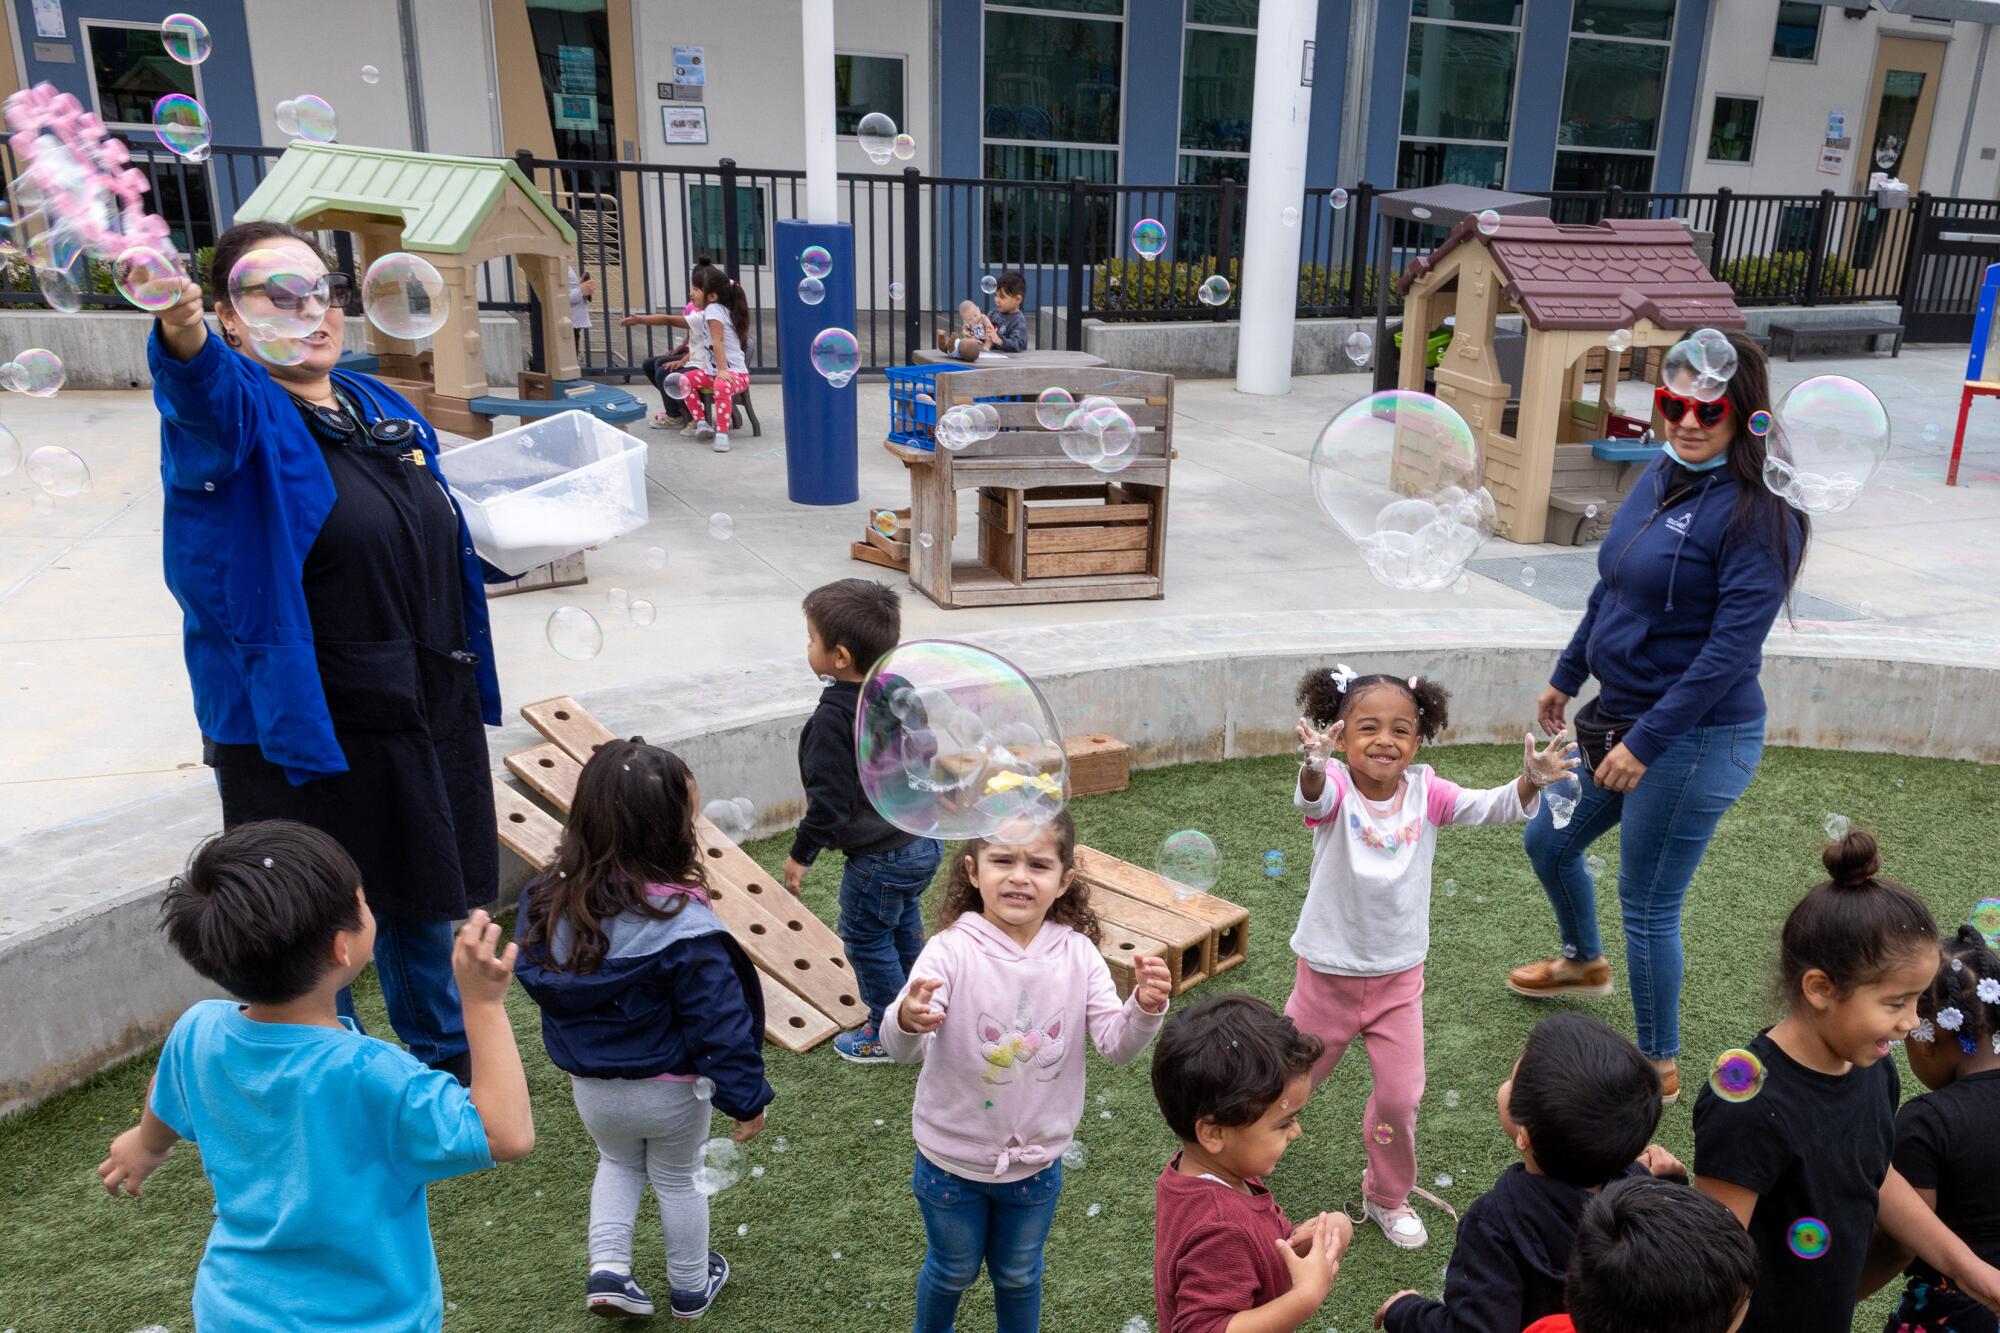 Students play with bubbles on a playground.